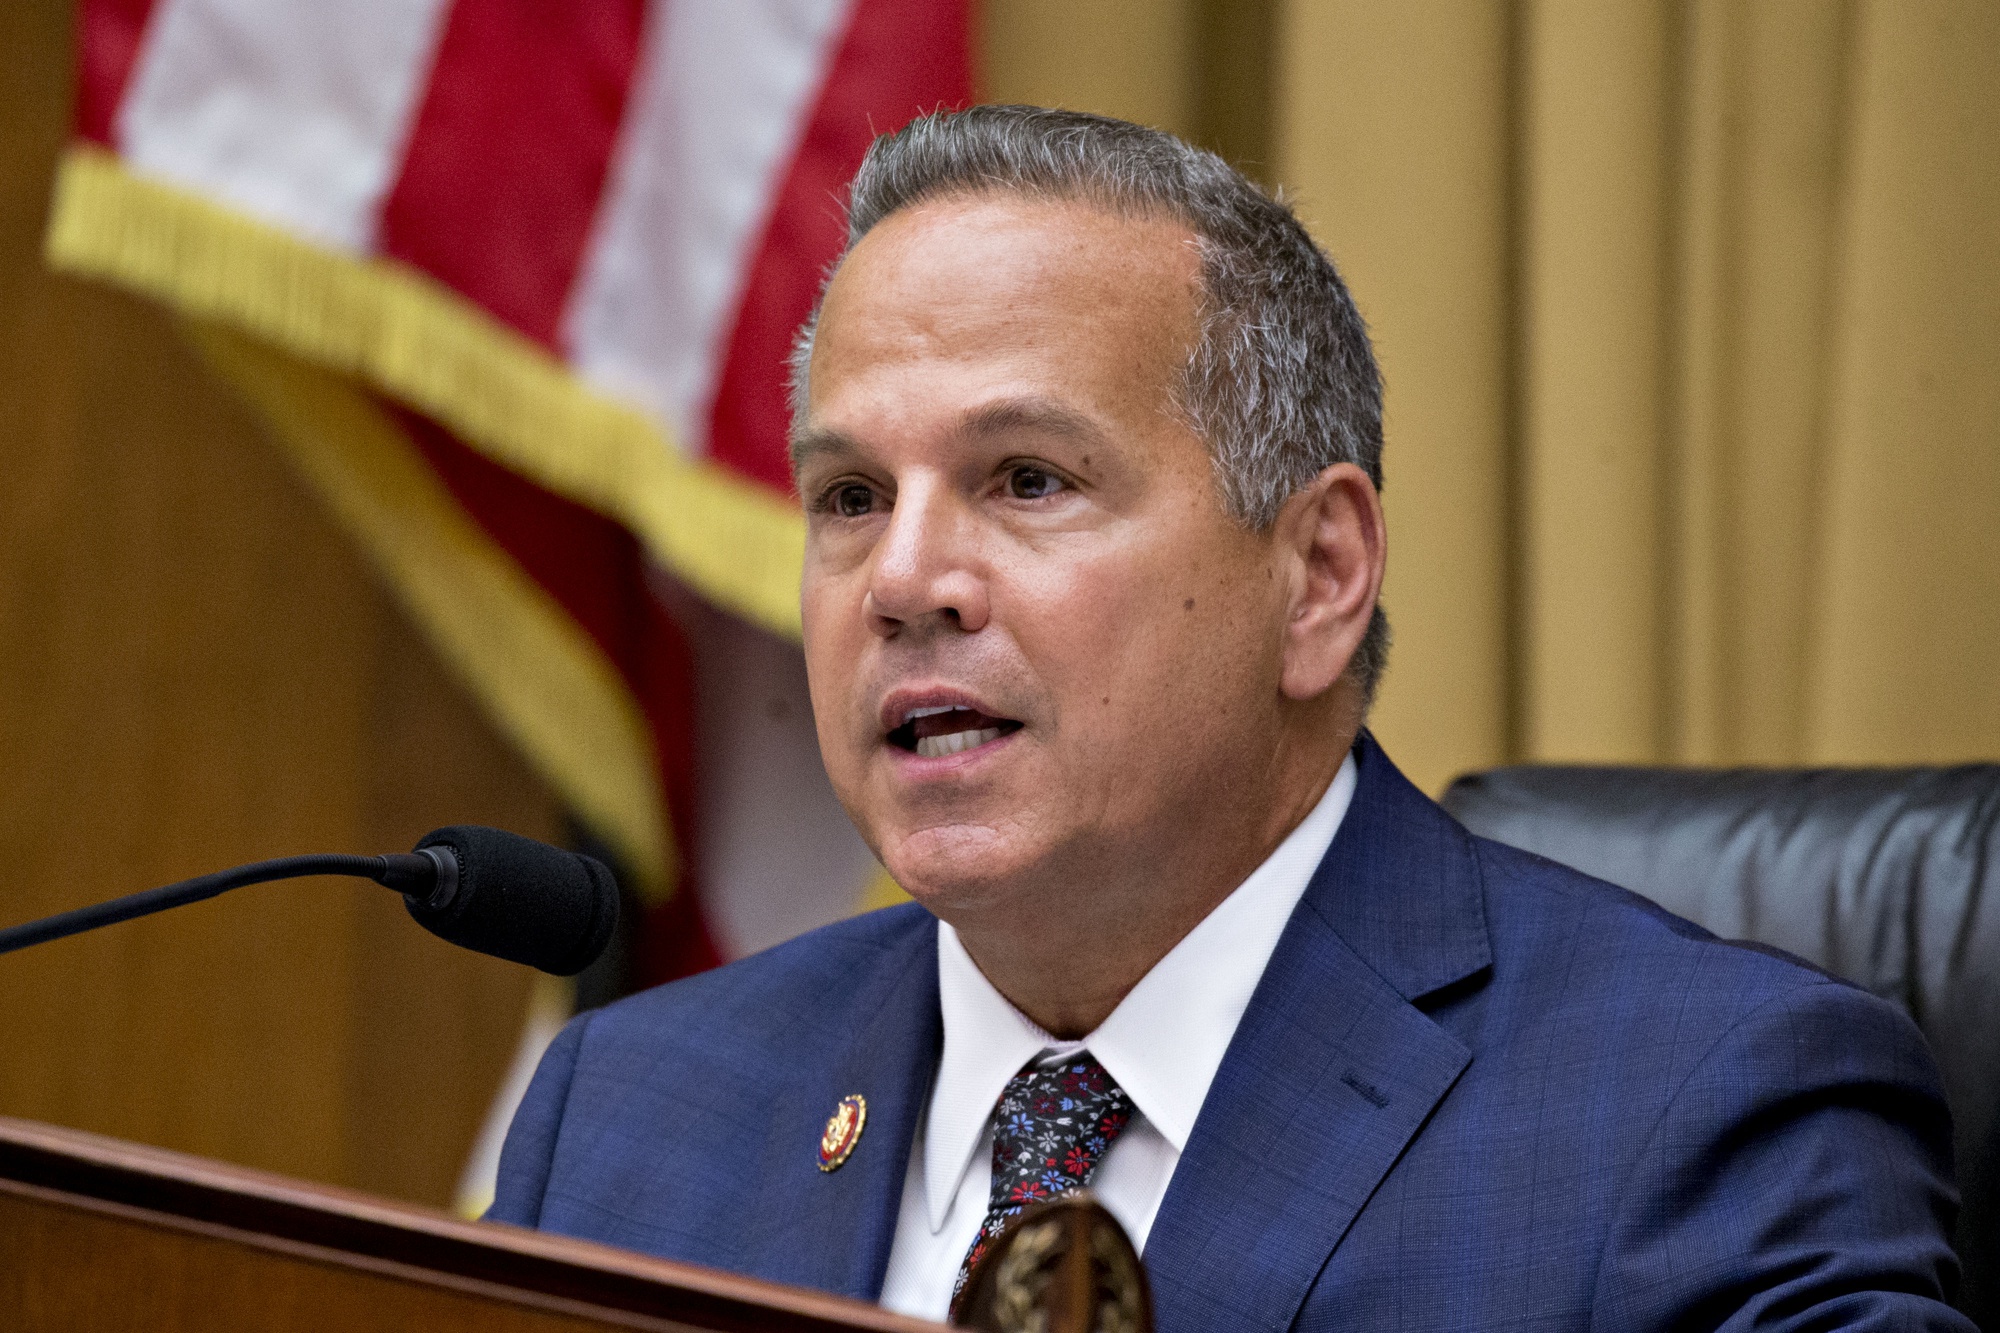 Amazon (AMZN) Challenged by Rep. David Cicilline on Competition - Bloomberg